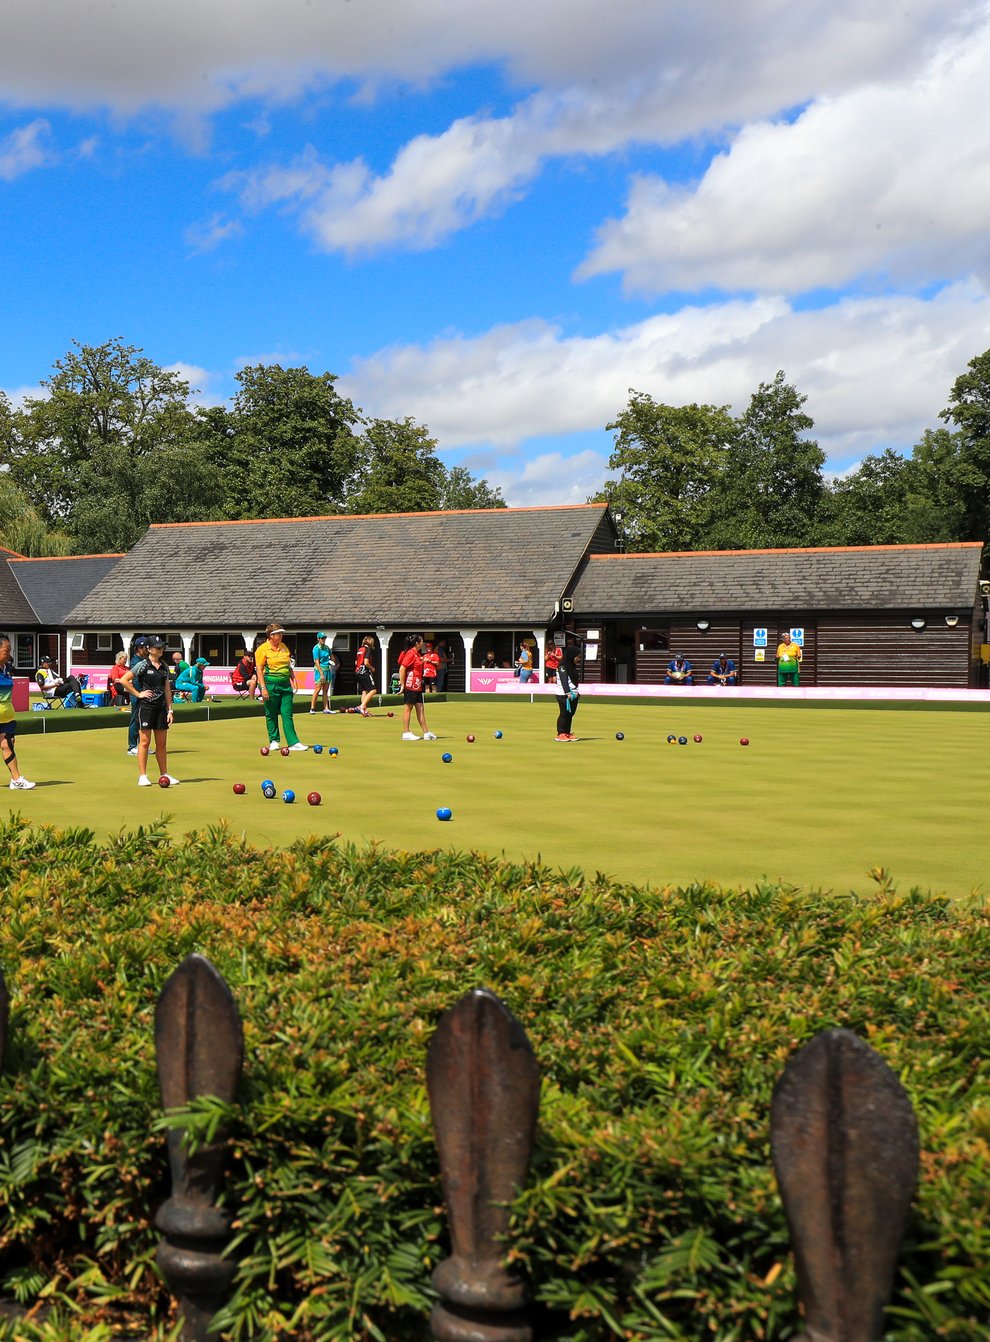 The lush lawns of Royal Leamington Spa have hosted a thrilling Commonwealth Games (Bradley Collyer/PA)